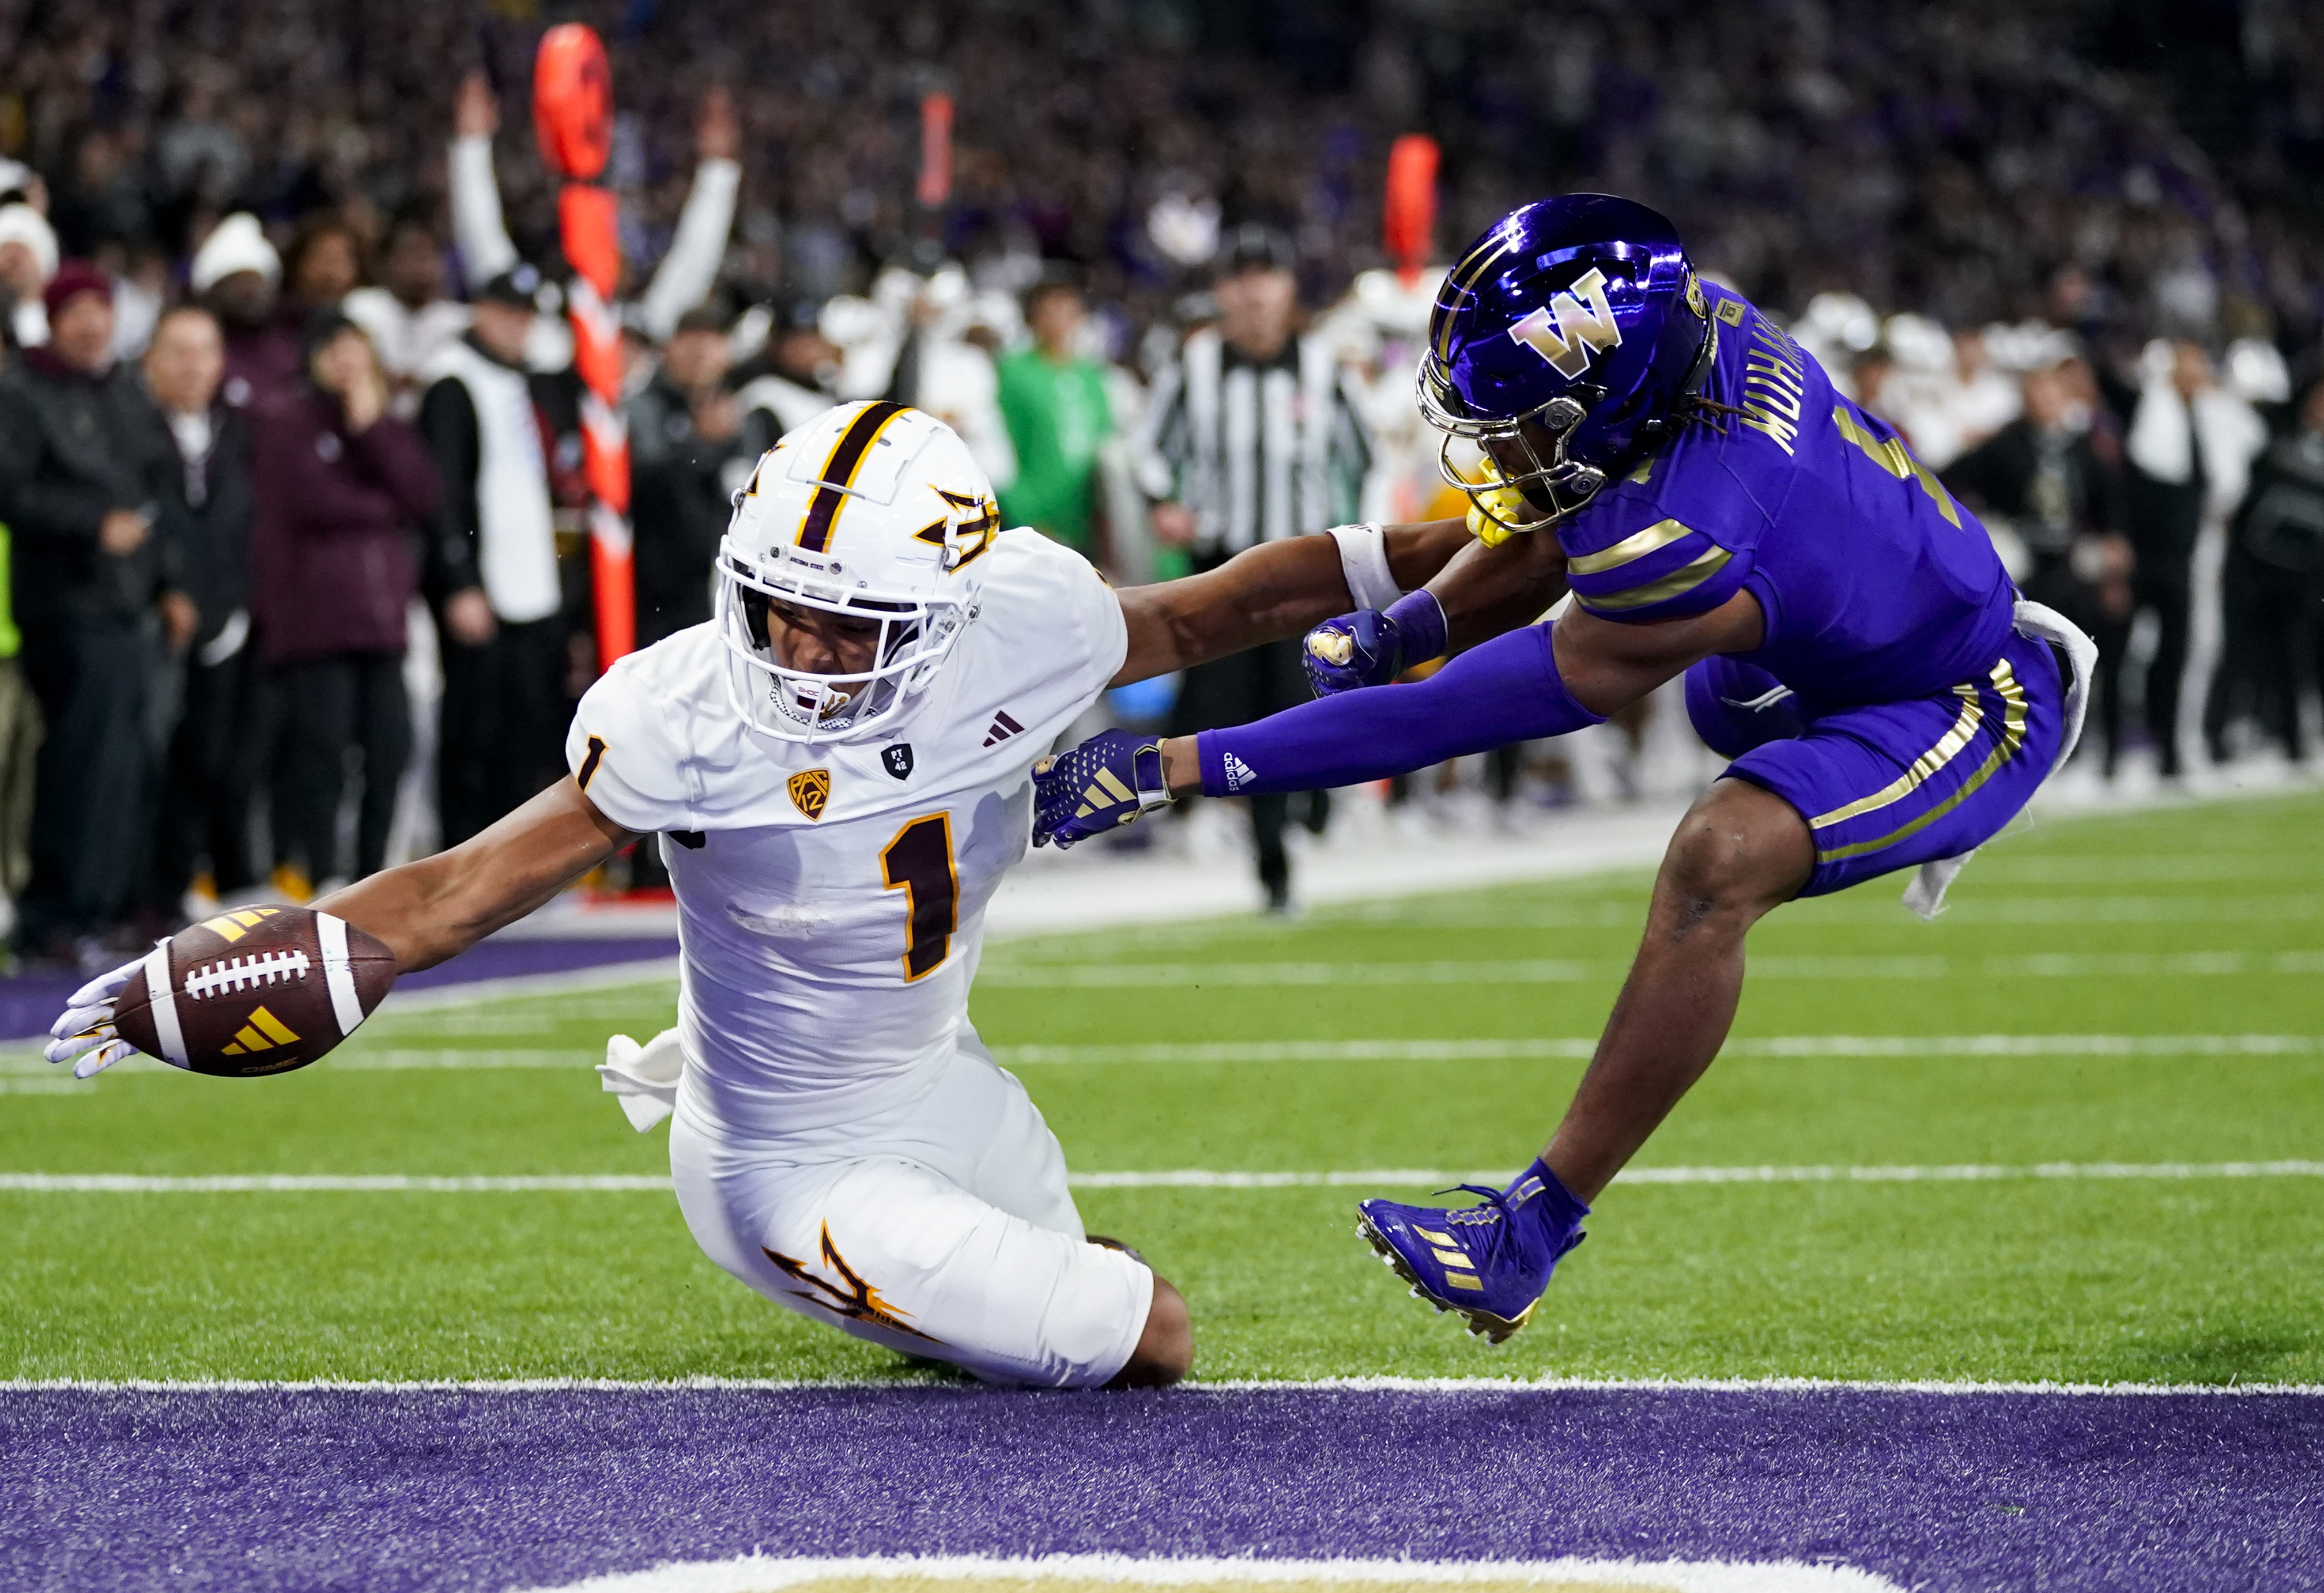 What ASU, Washington players and coaches said about game